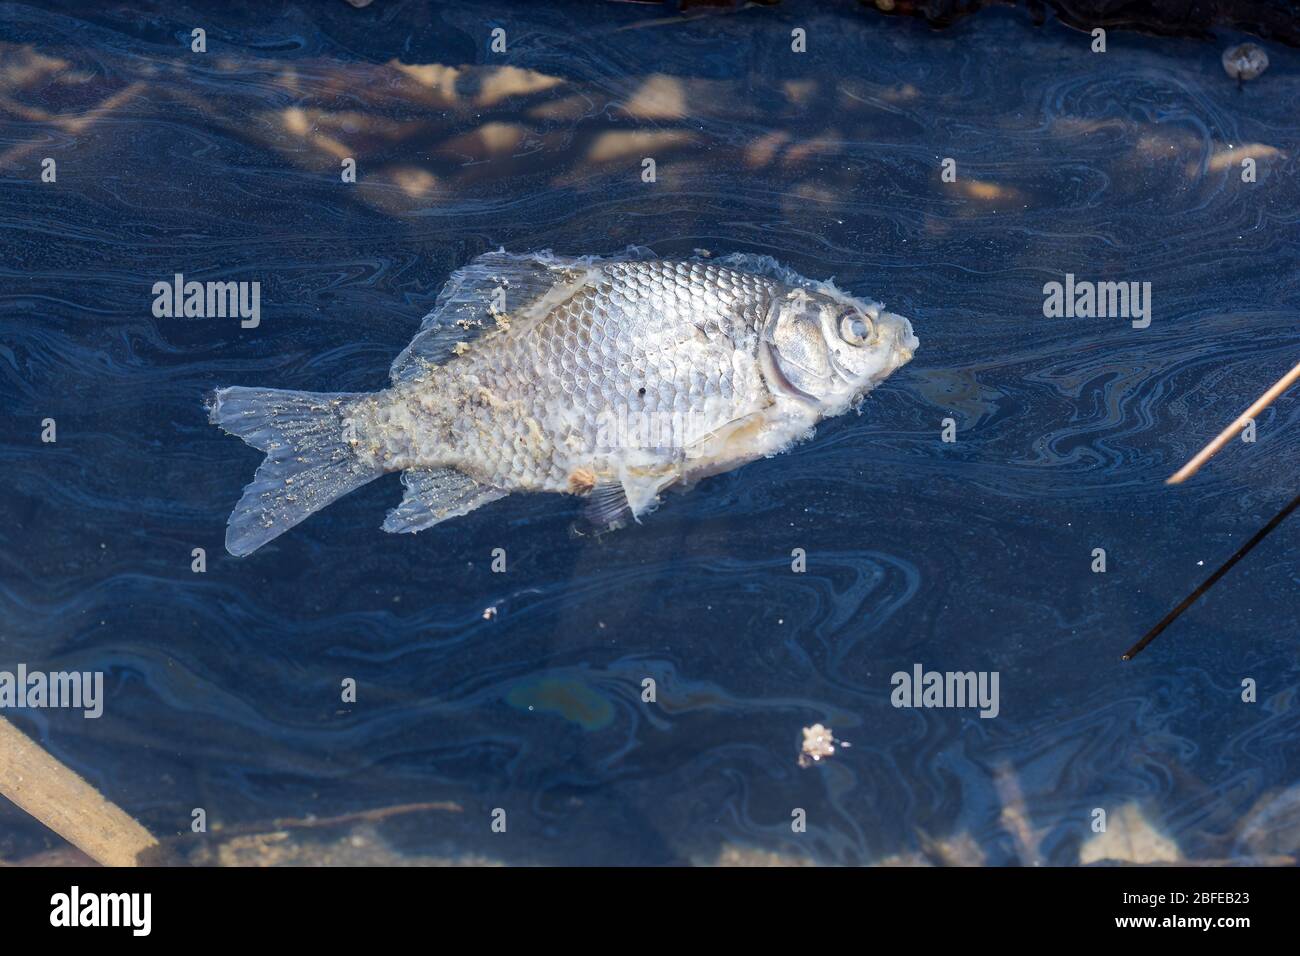 Dead fish on the surface of a polluted pond. The consequence of human life. Stock Photo